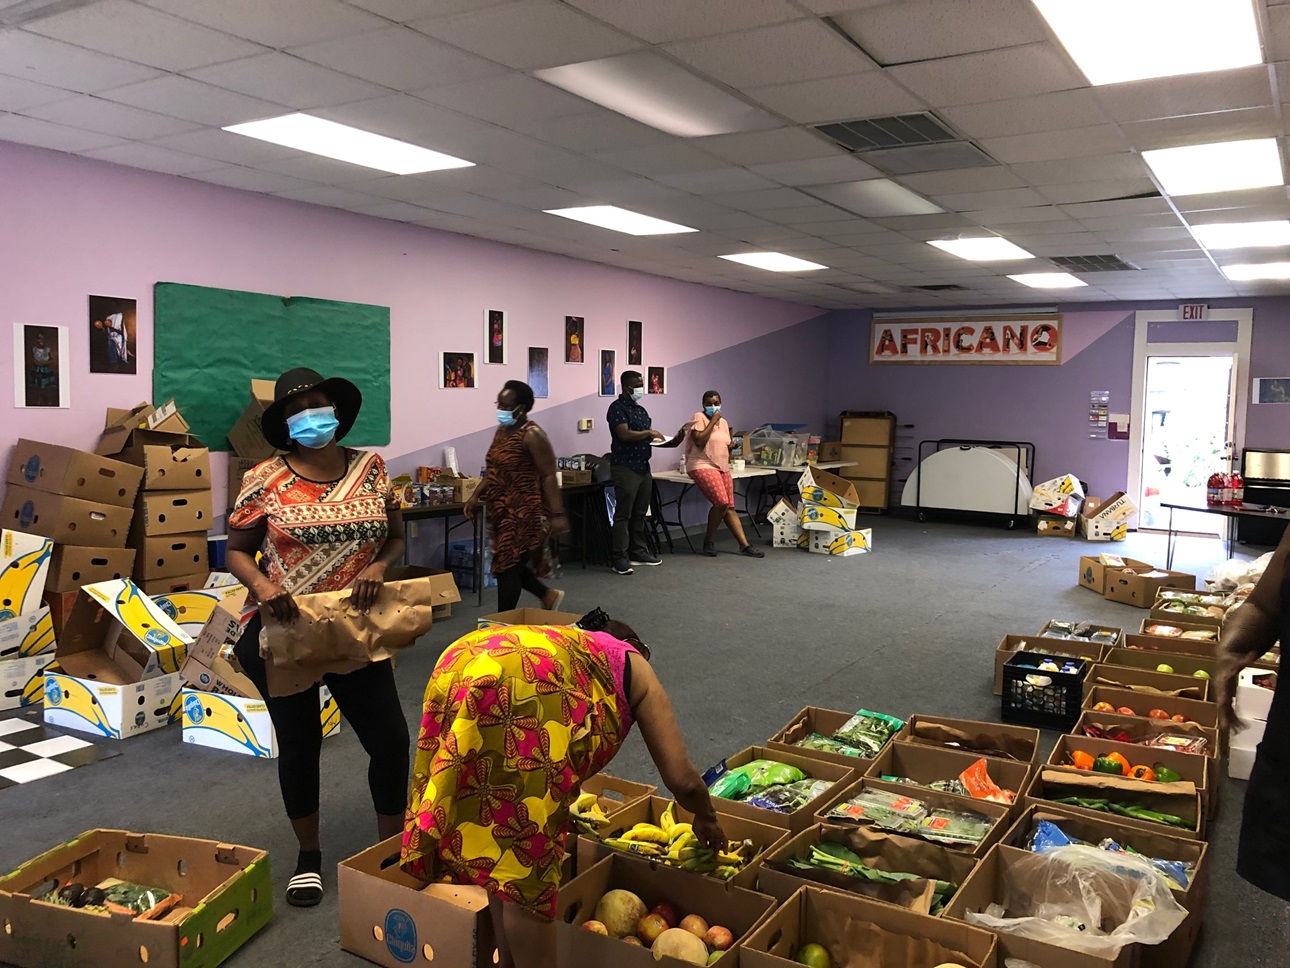 Women at Africano Waltham standing among boxes full of produce for a food drive.